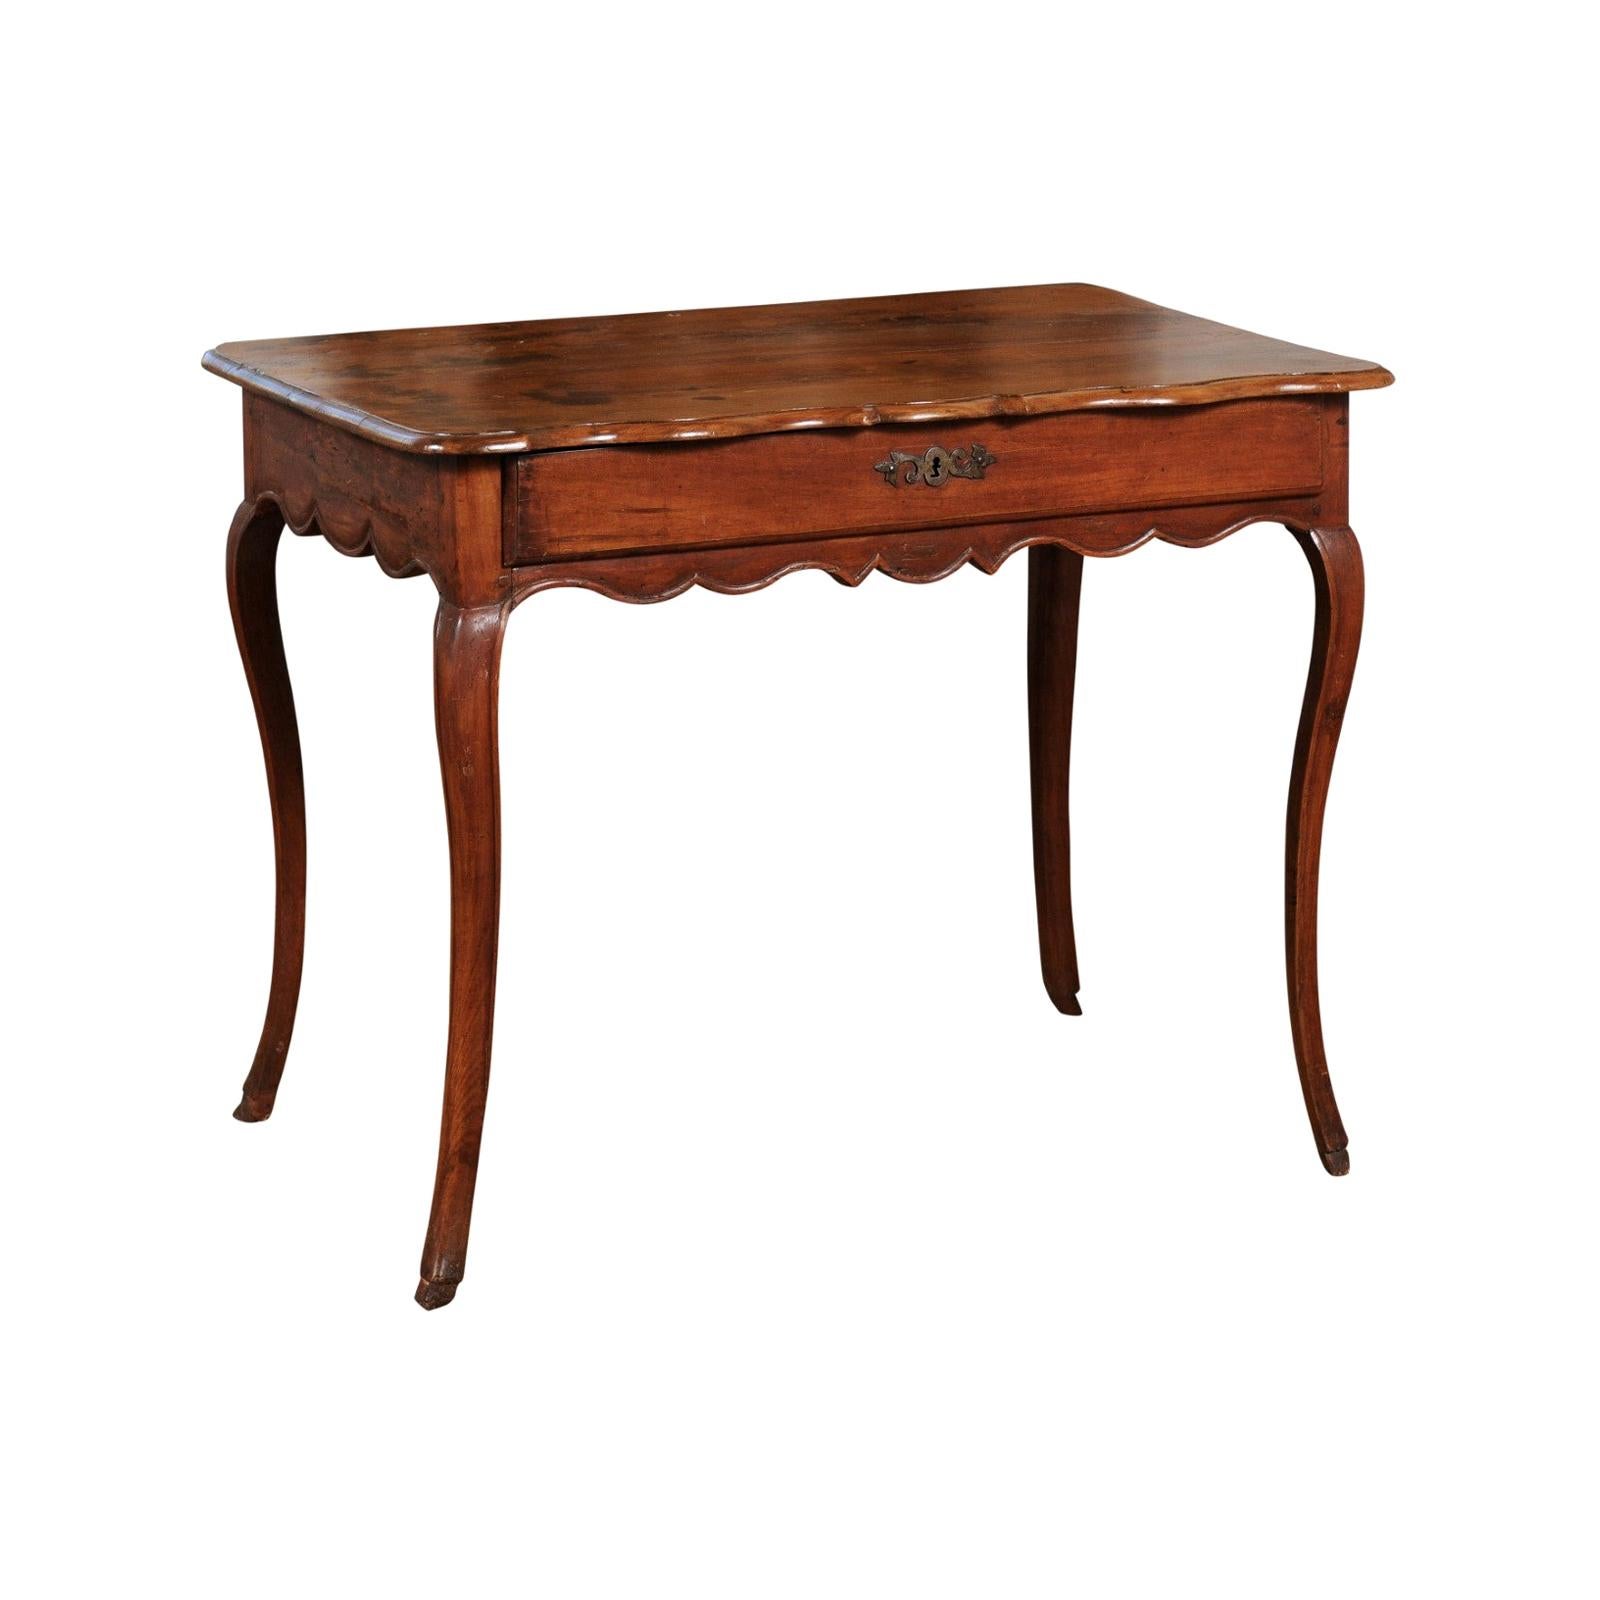 French Louis XV Late 18th Century Cherry Table with Drawer from the Rhône Valley